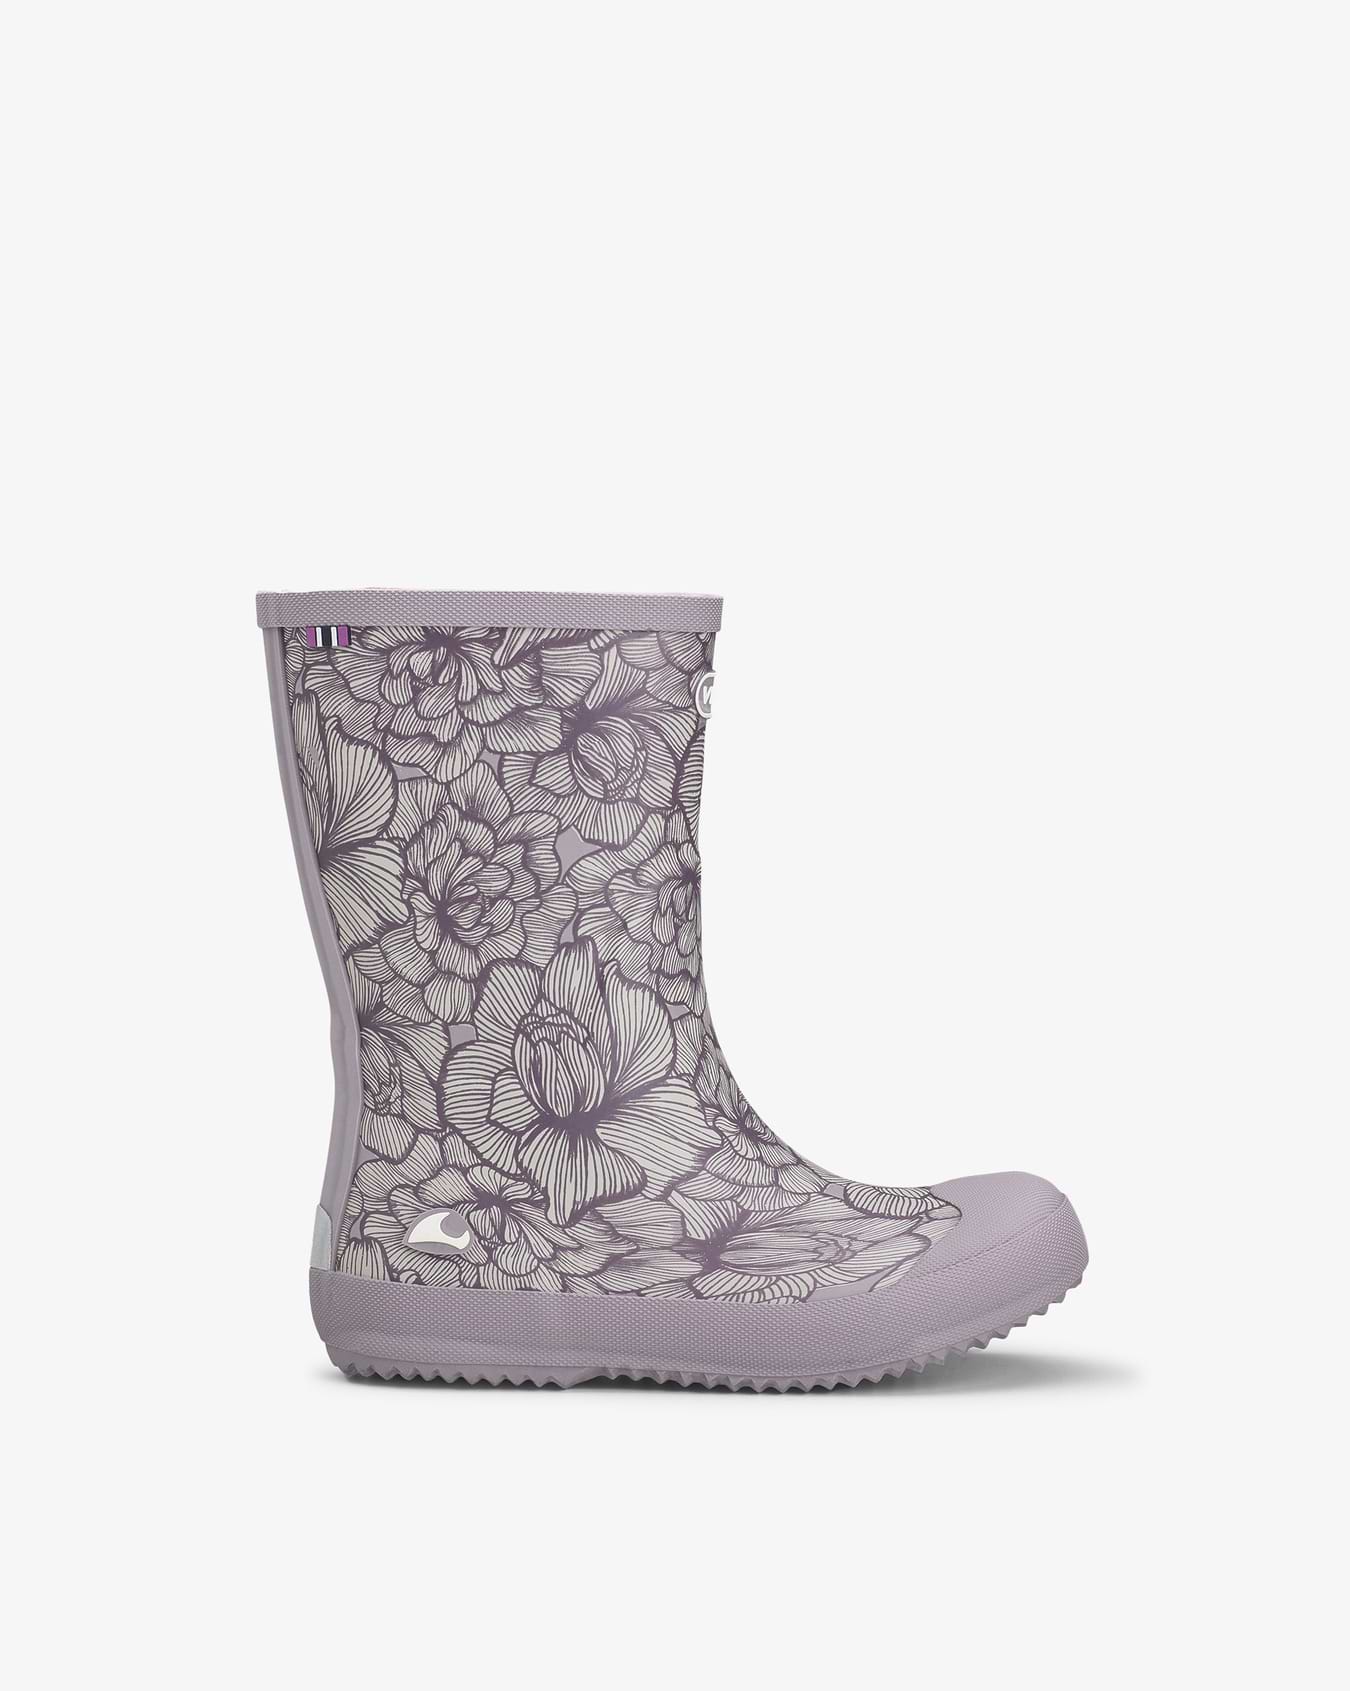 Indie Print Dusty Pink/Cream Rubber Boot